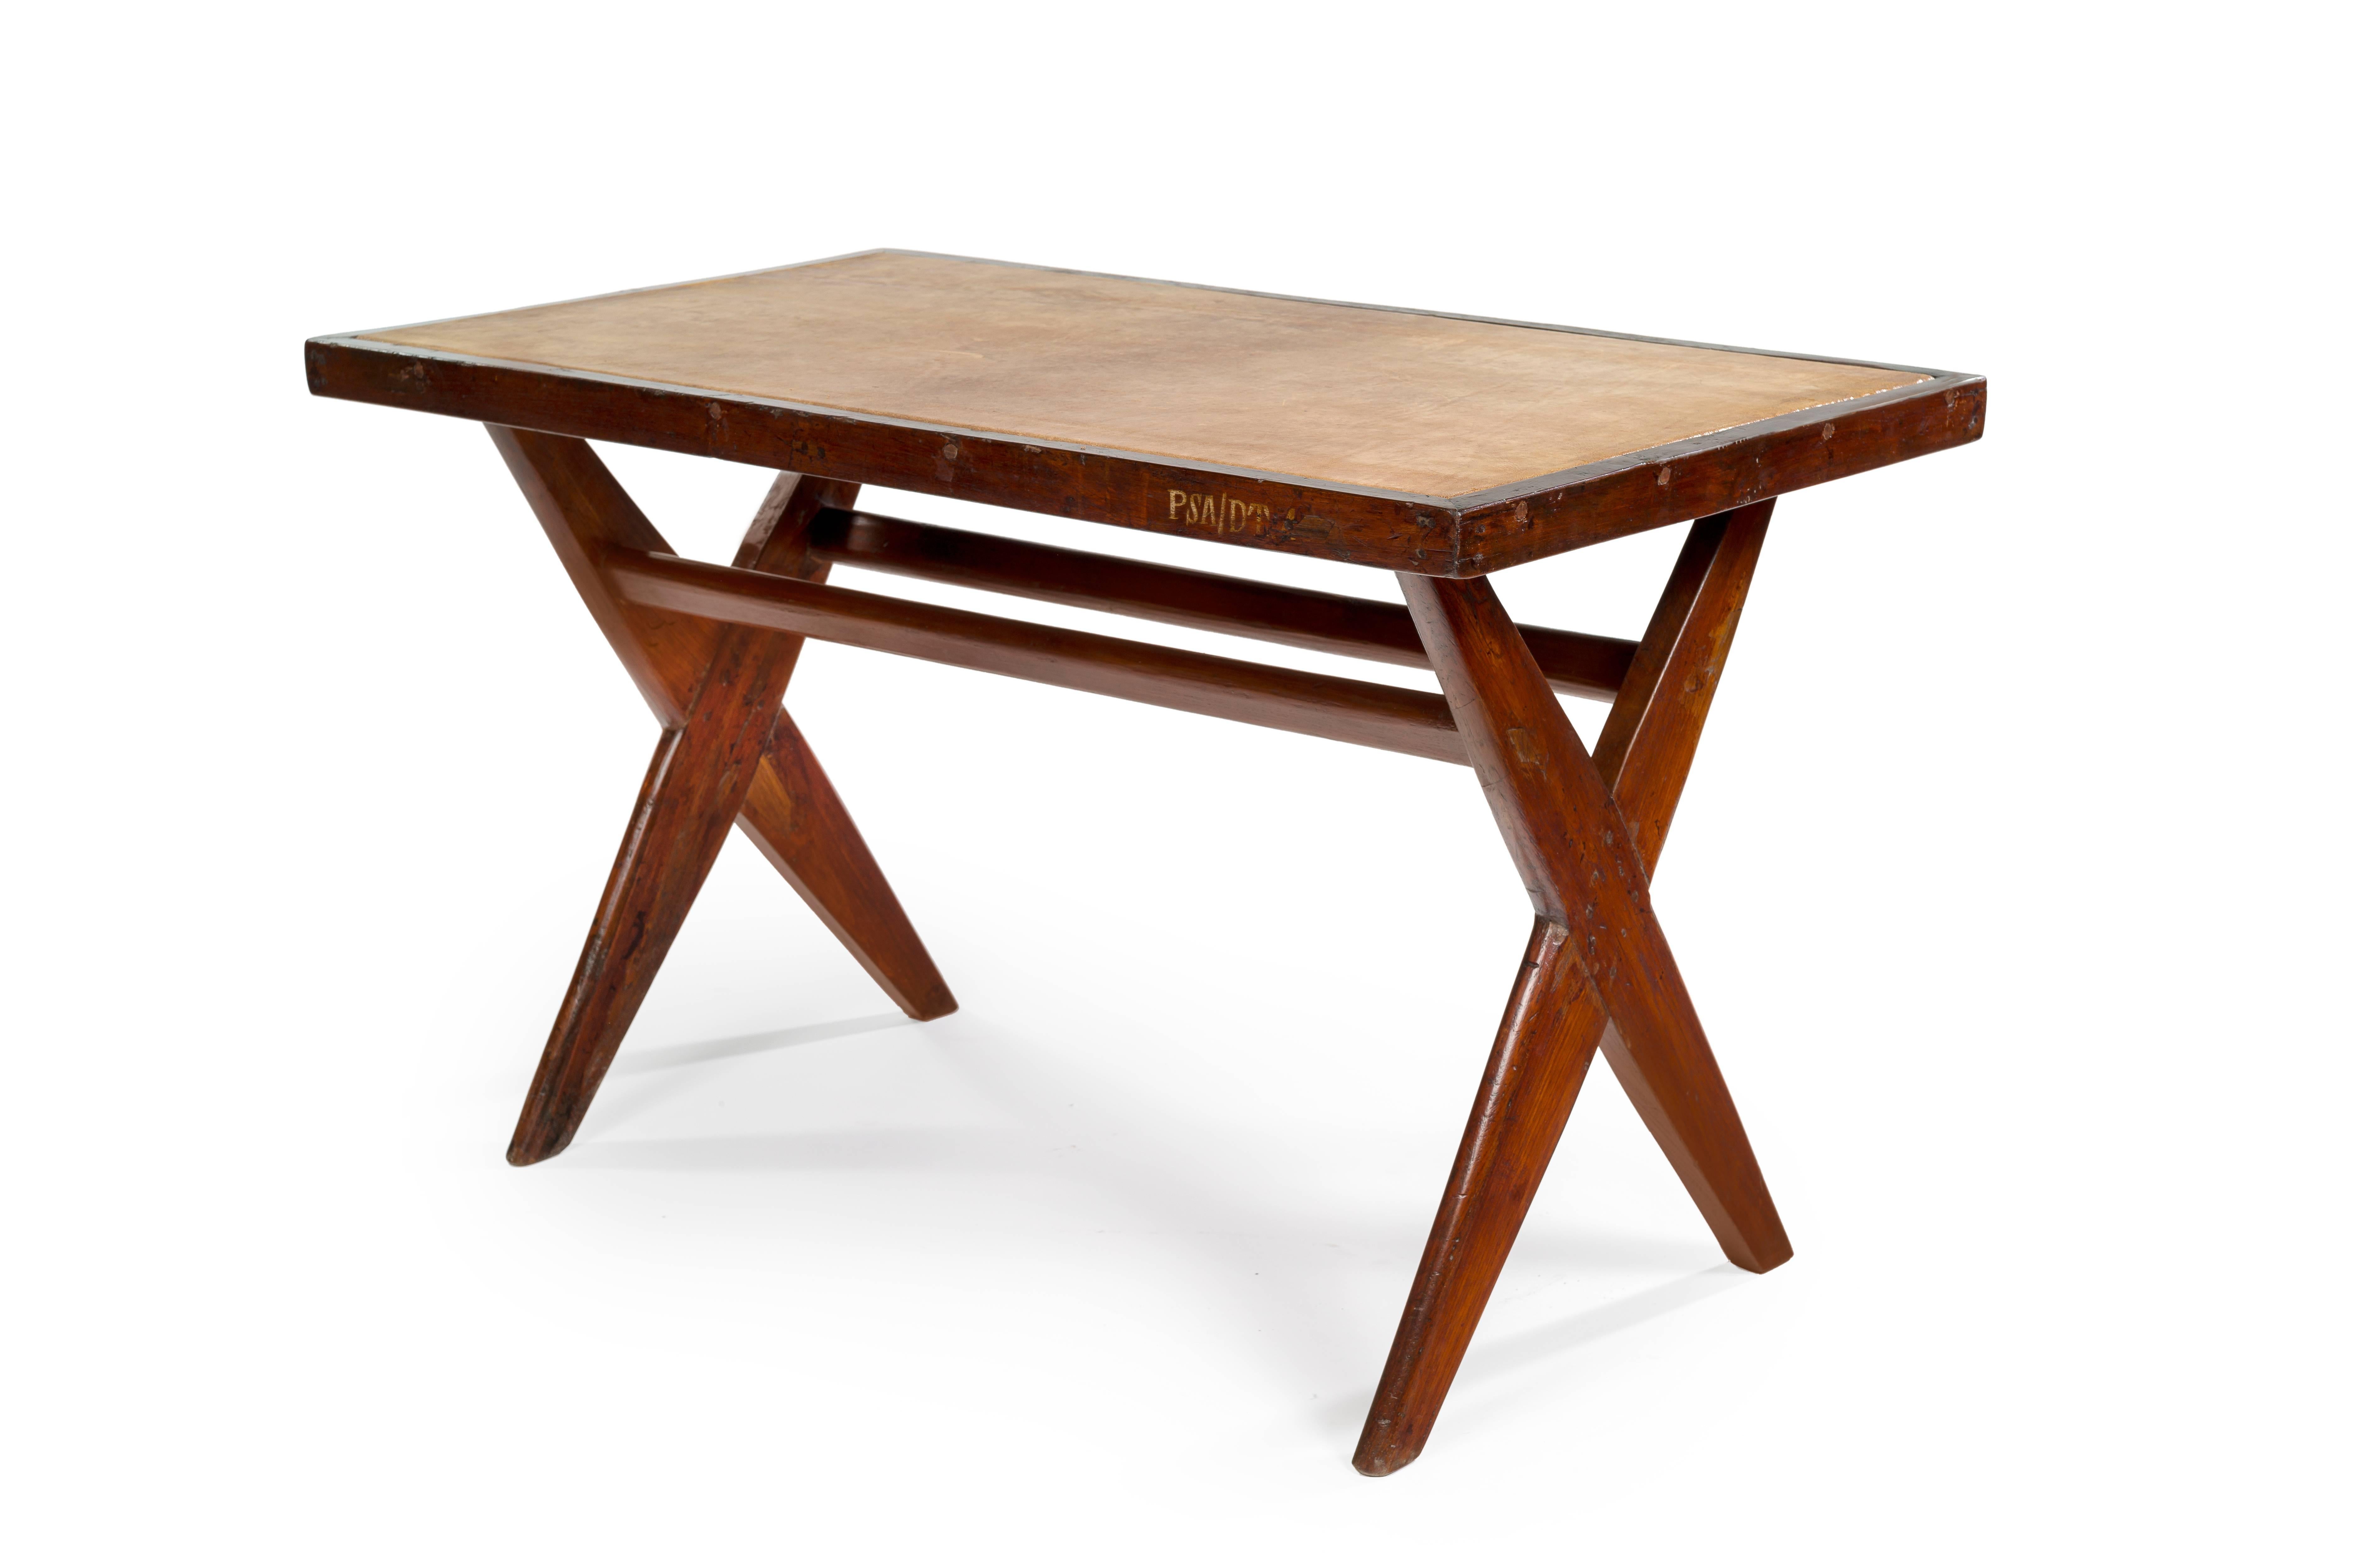 Pierre Jeanneret
PJ-TA-09-B
Important : vintage collector's item for sale with guaranteed authenticity. 
Table called “Reading table”, circa 1961.
Library table version with covered leather tabletop.
Solid and plated teak.
Central State Library